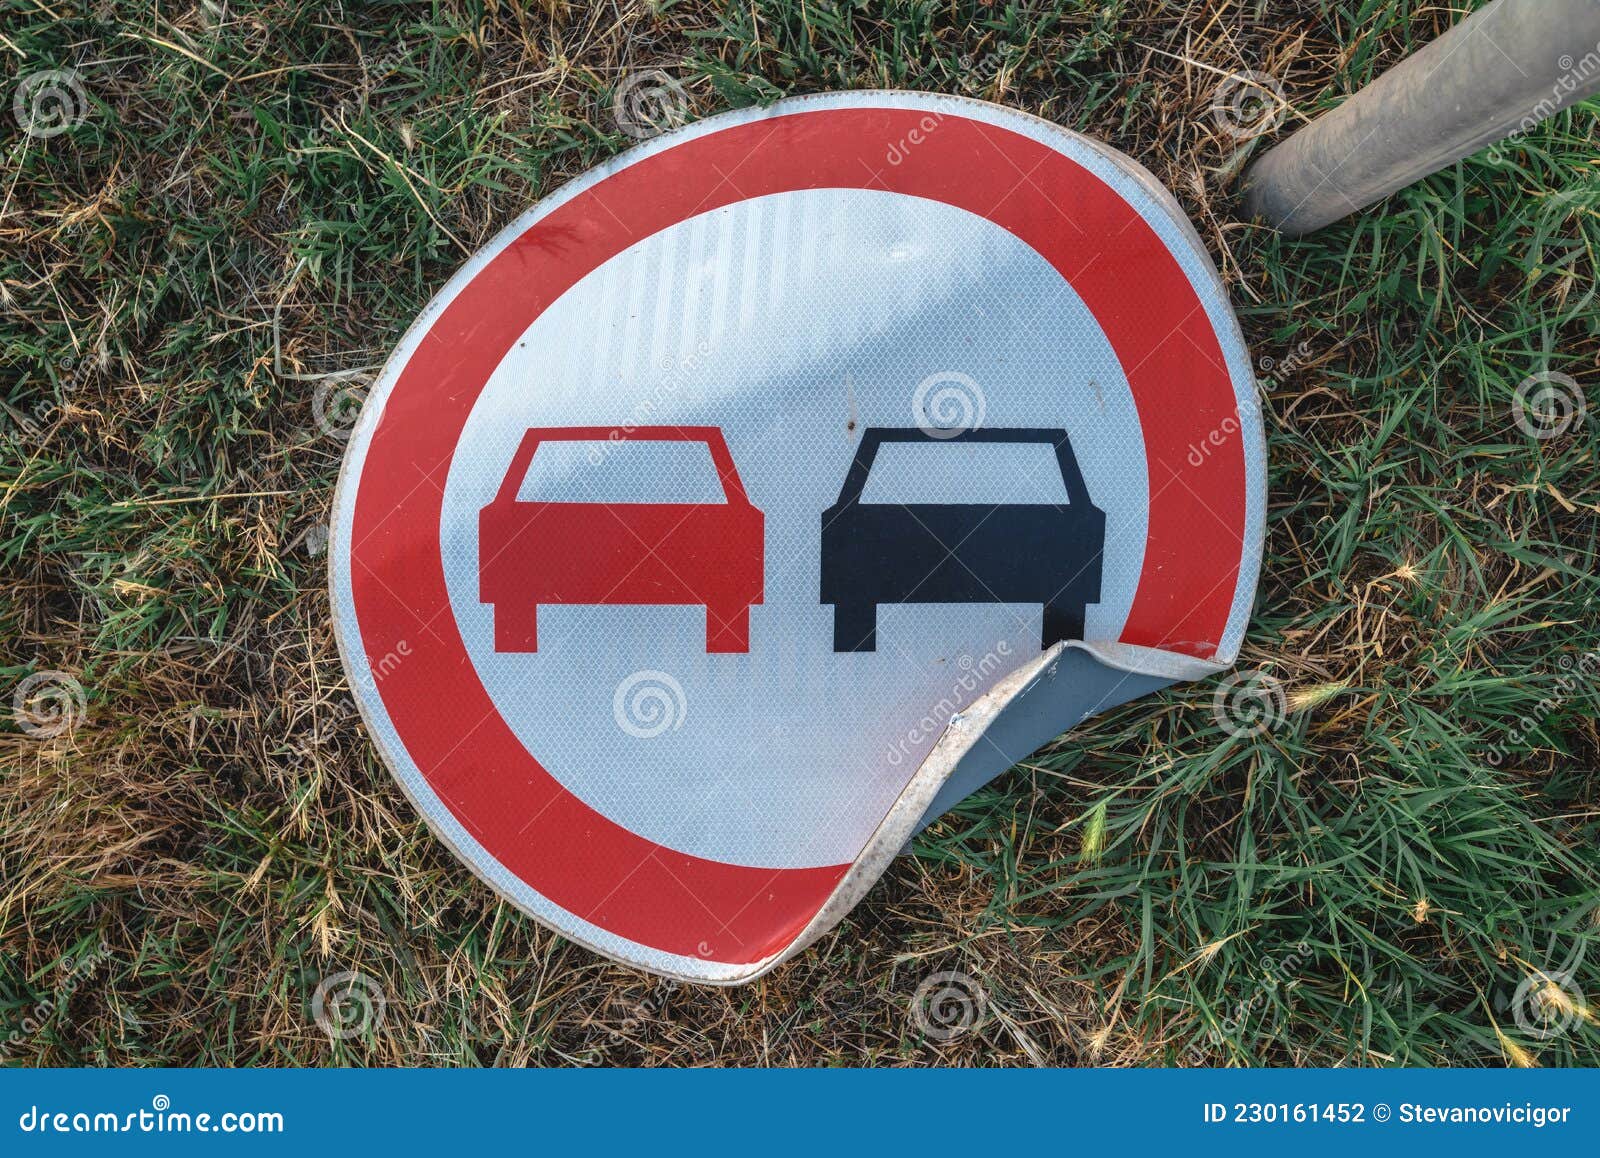 no overtaking traffic sign knocked on the ground